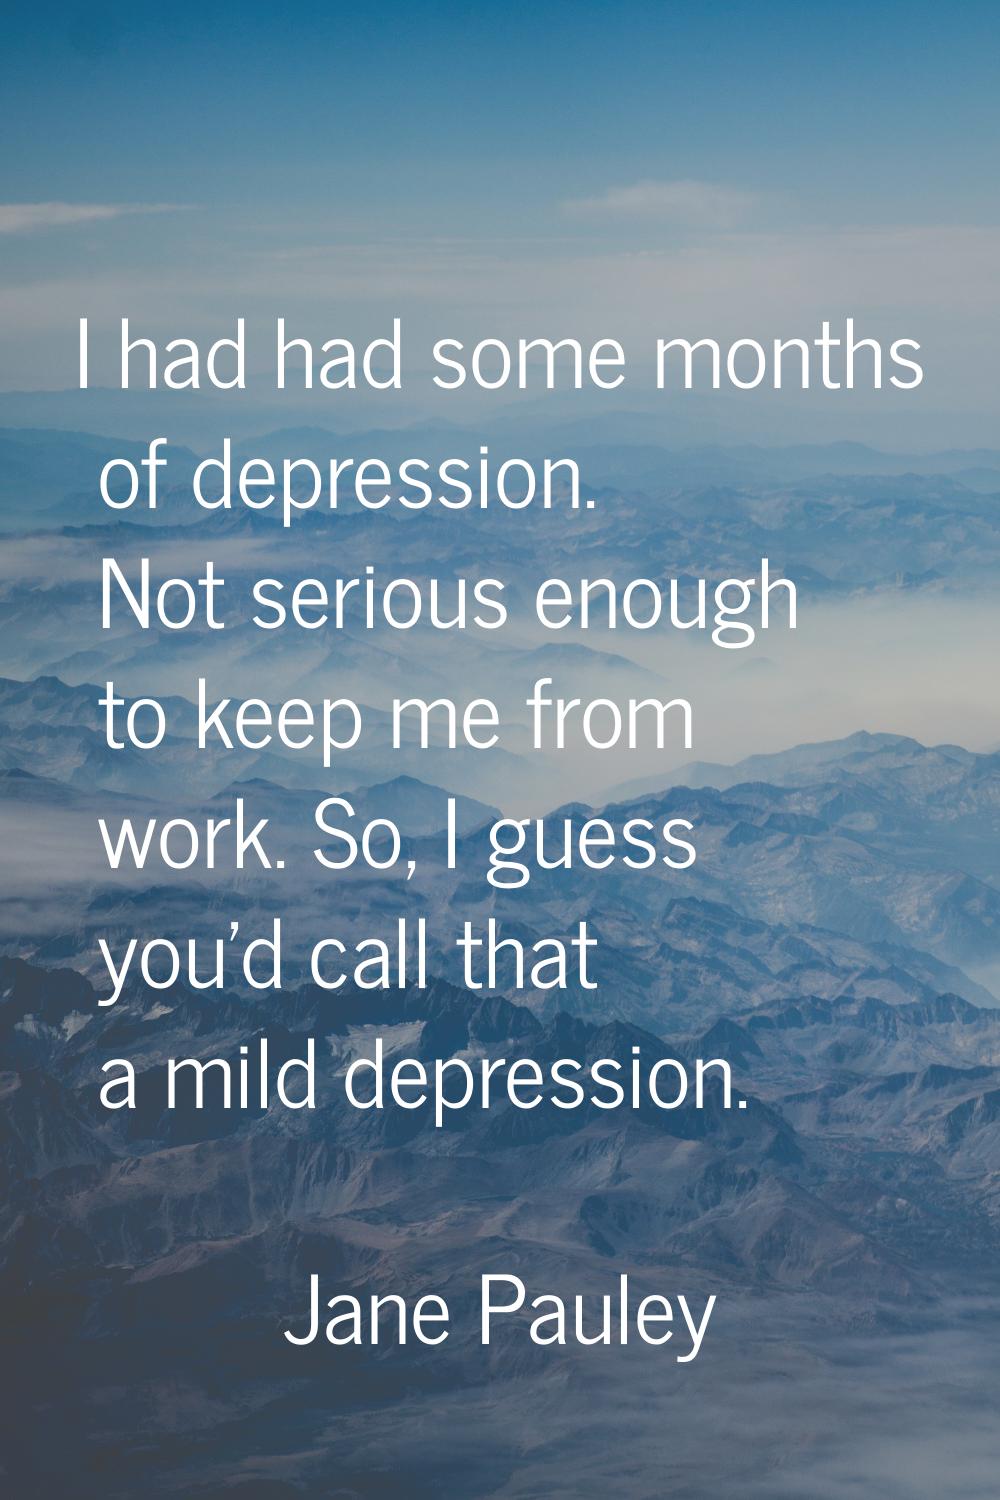 I had had some months of depression. Not serious enough to keep me from work. So, I guess you'd cal